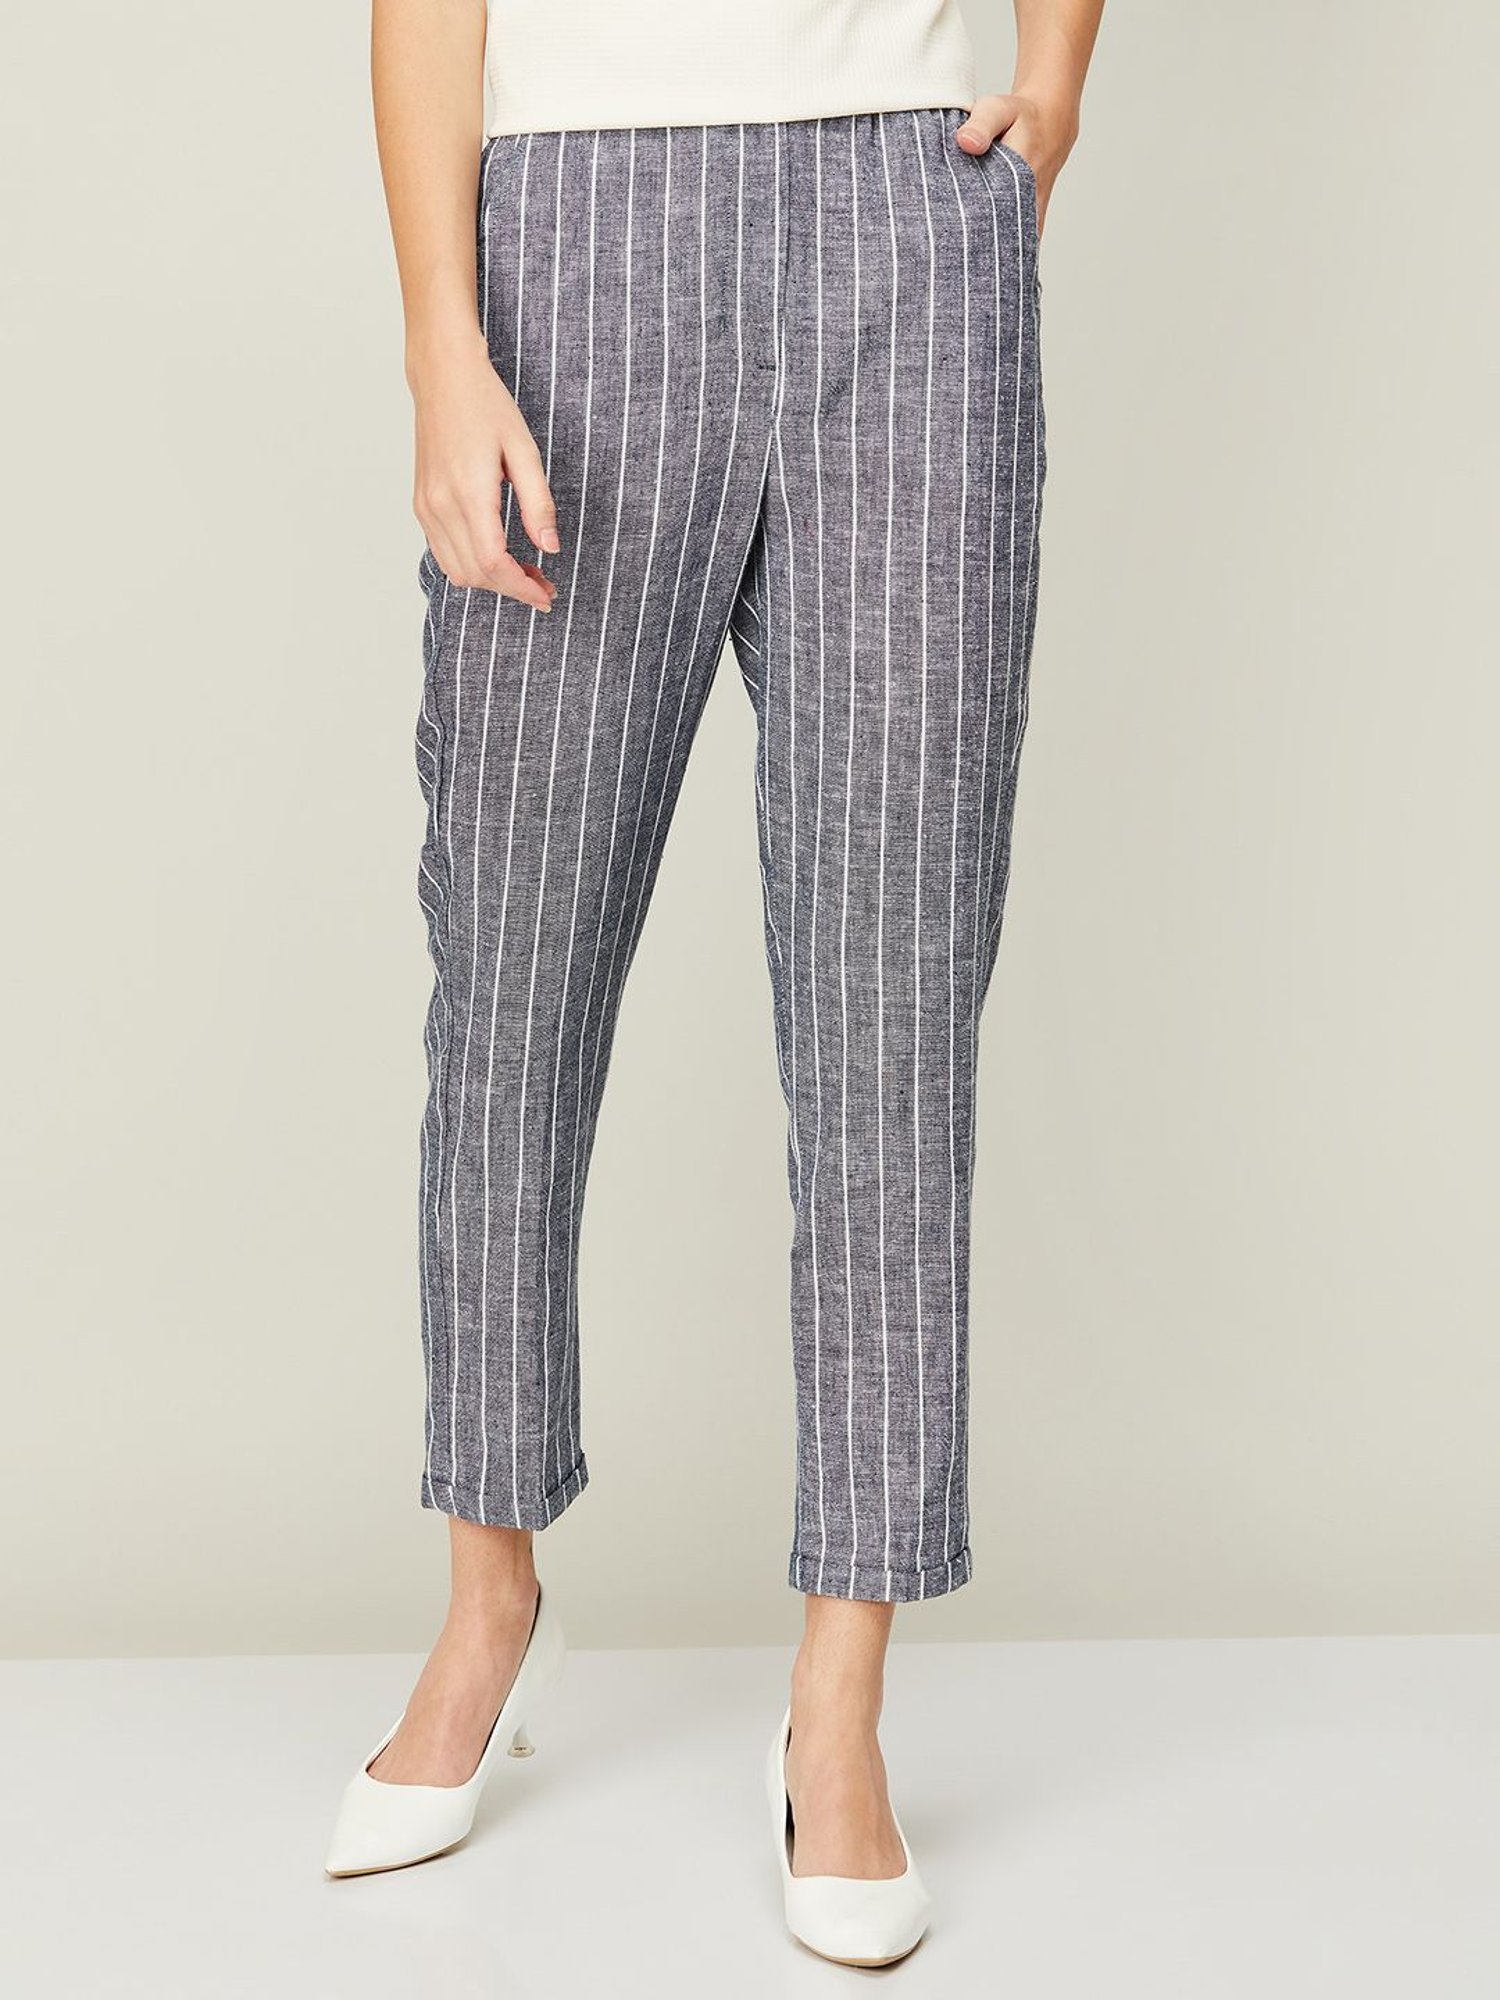 Buy Men's Black Pinstripe Power Stretch Joggers Online In India